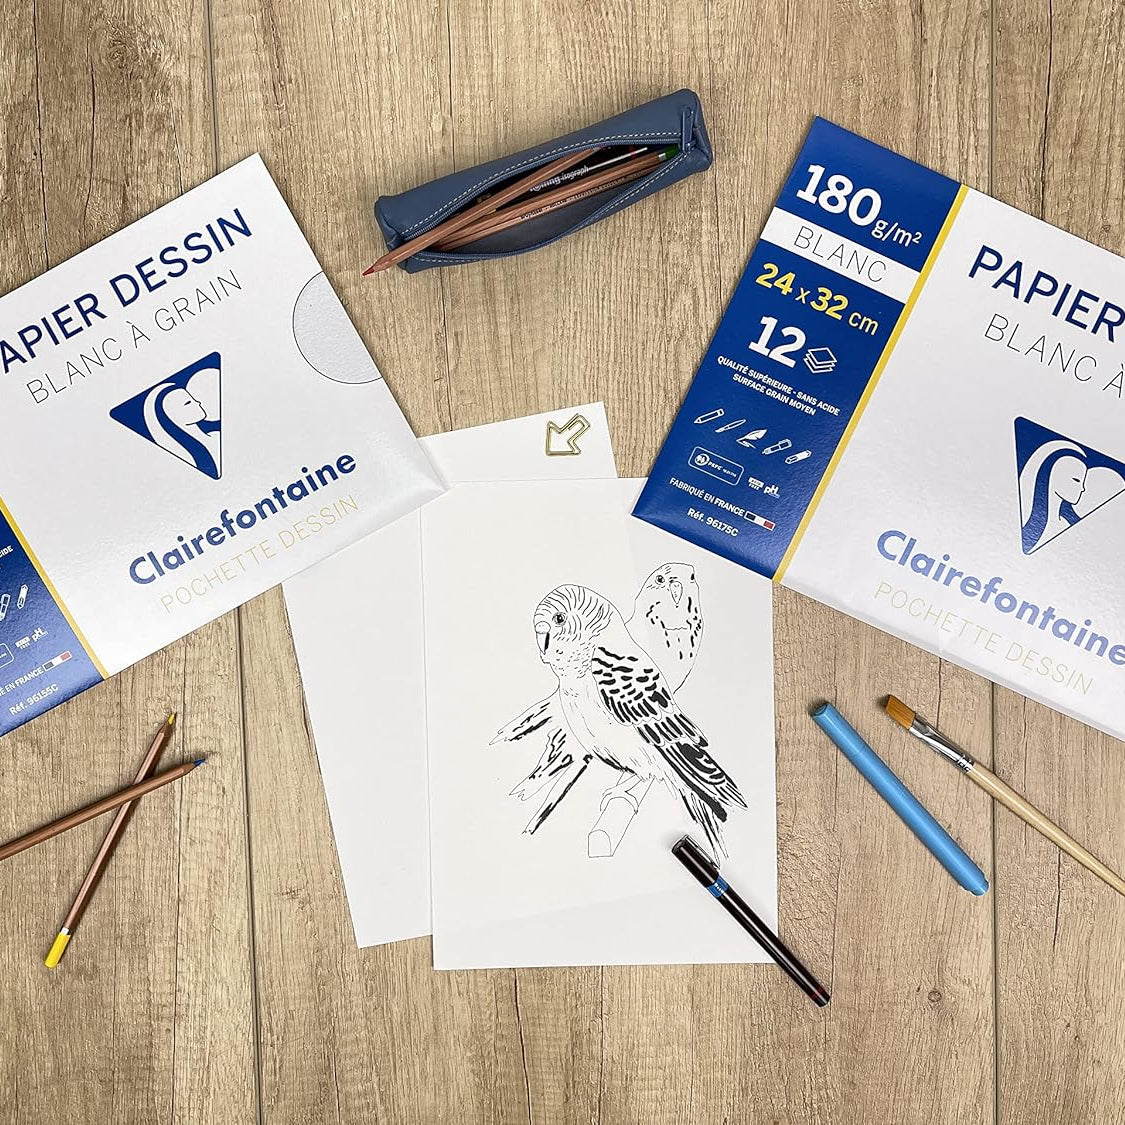 CLAIREFONTAINE White Grained Drawing Paper 24x32cm 180g 12s